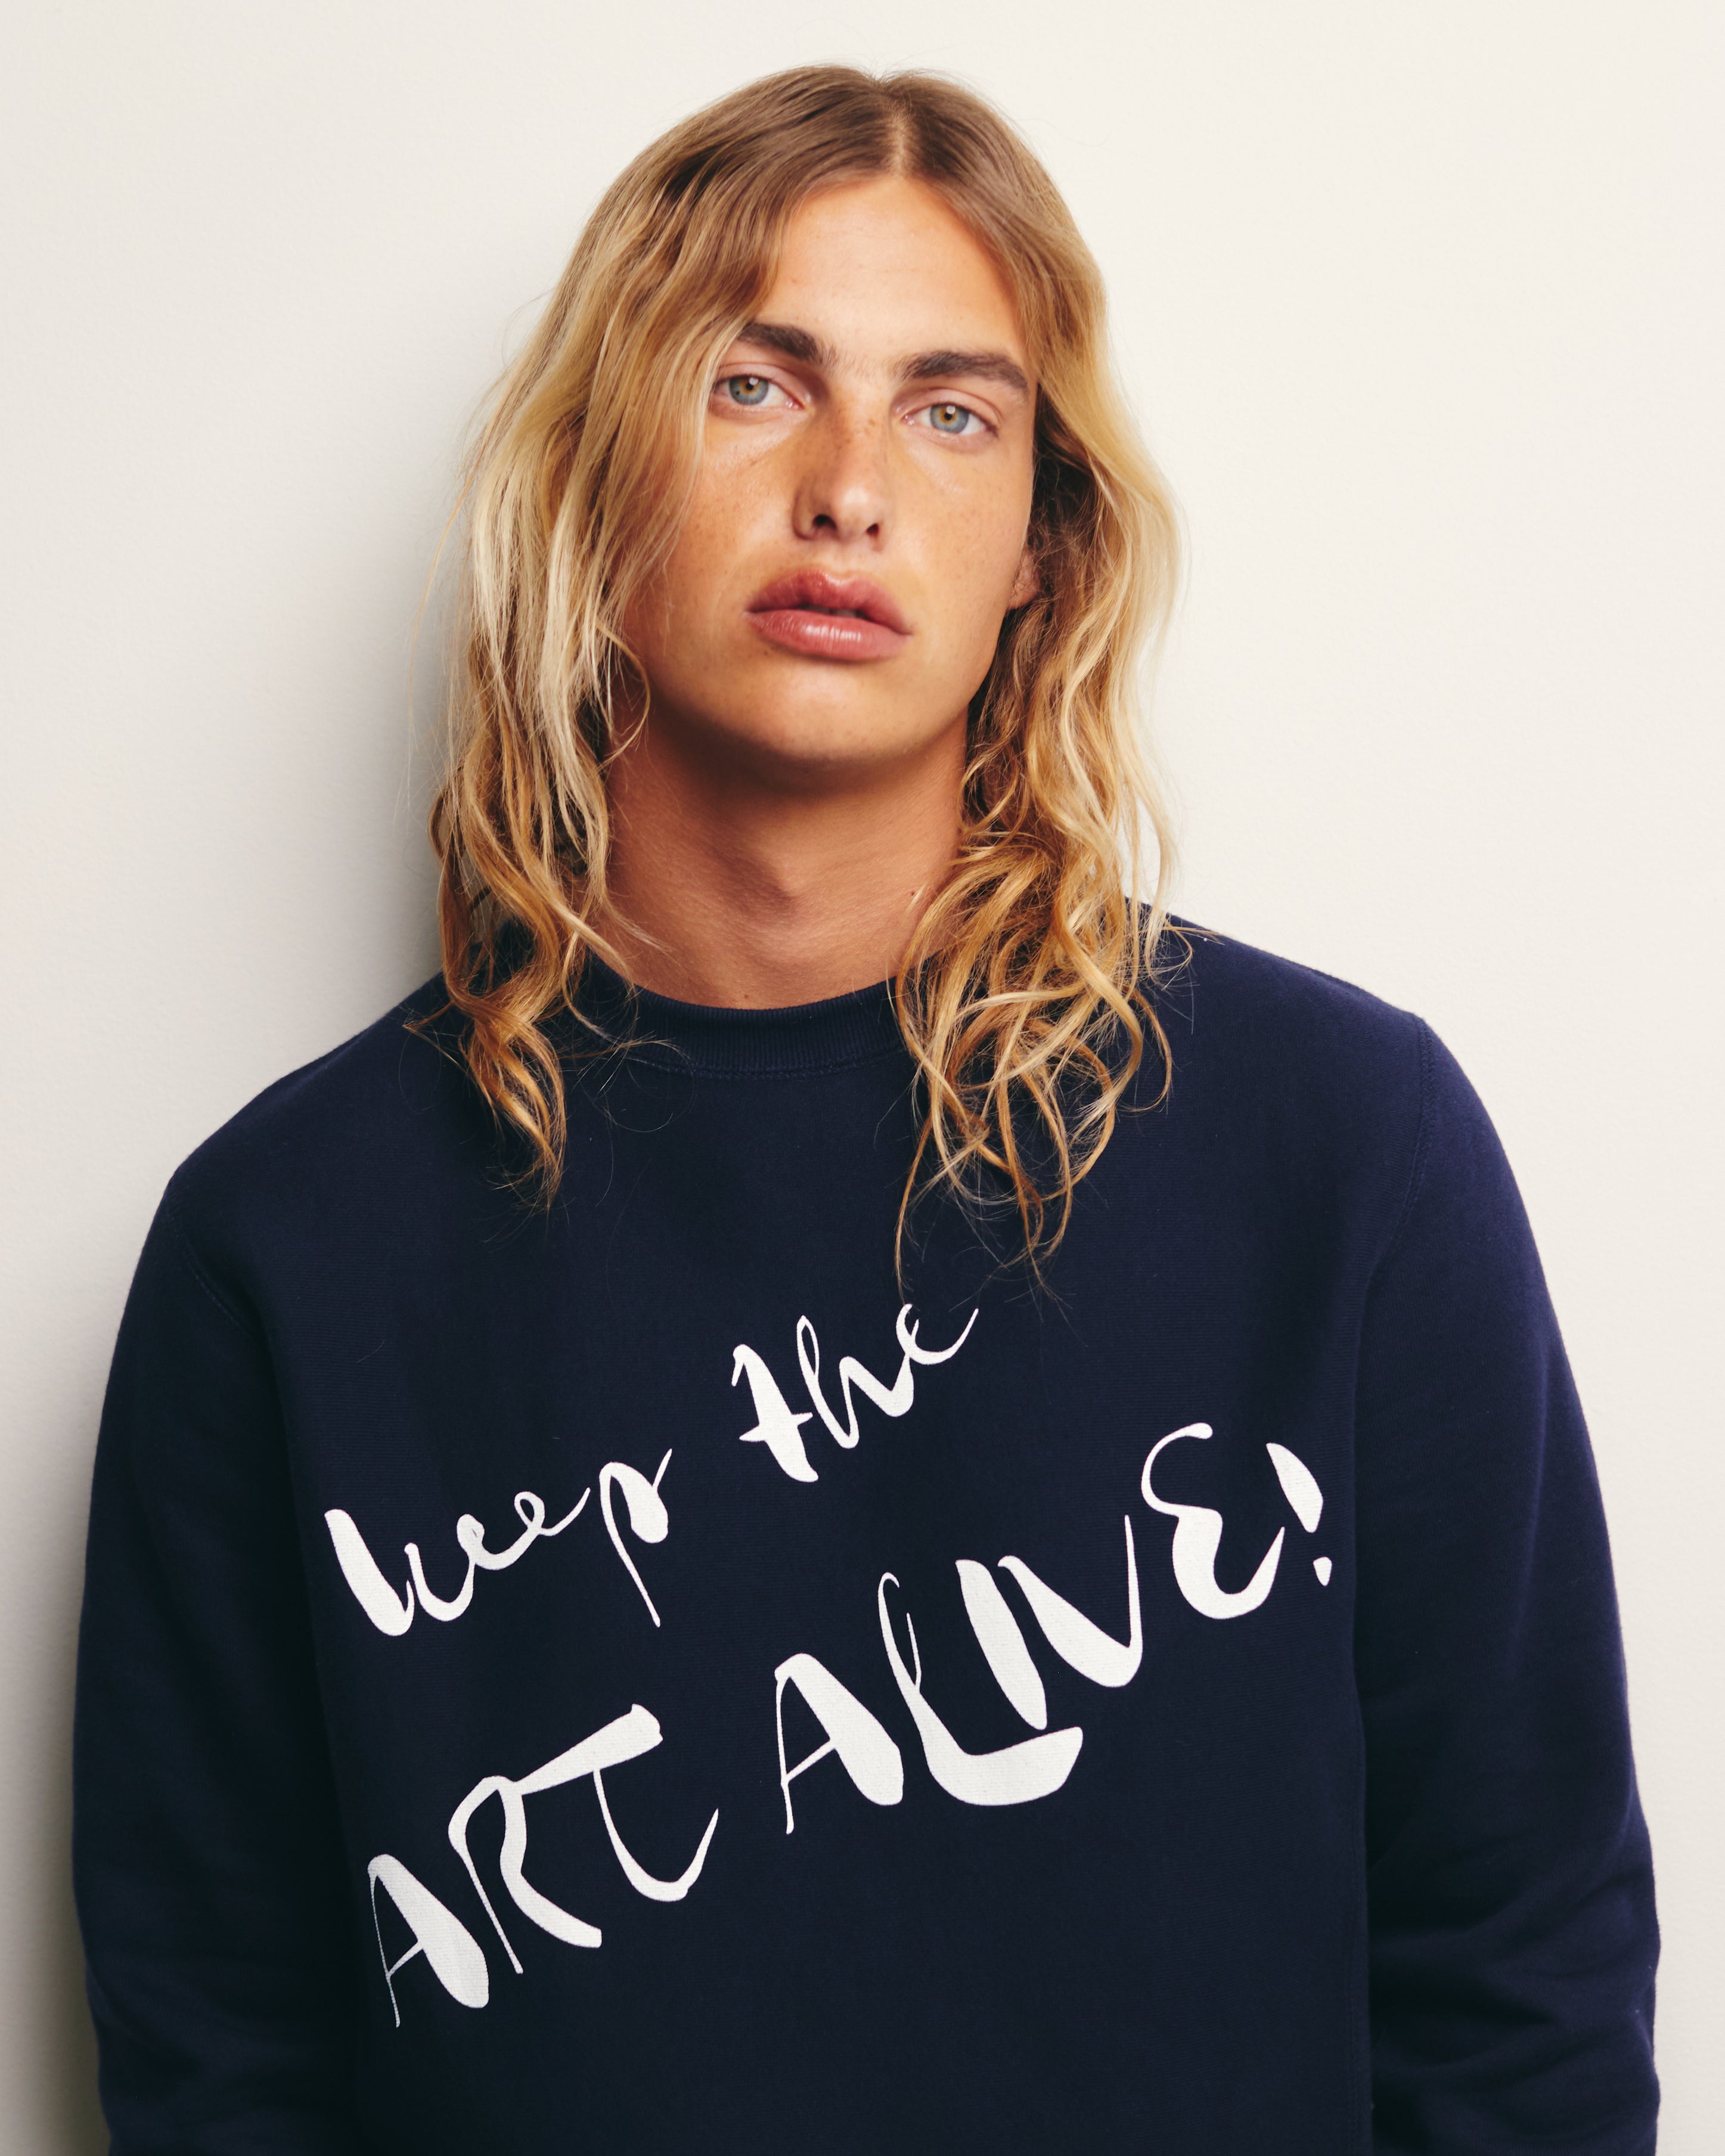 Lucas Ucedo wears Navy / Blue Keep The Art Alive New Wave Printed Heavyweight Sweatshirt/ Crewneck French New Wave Inspired